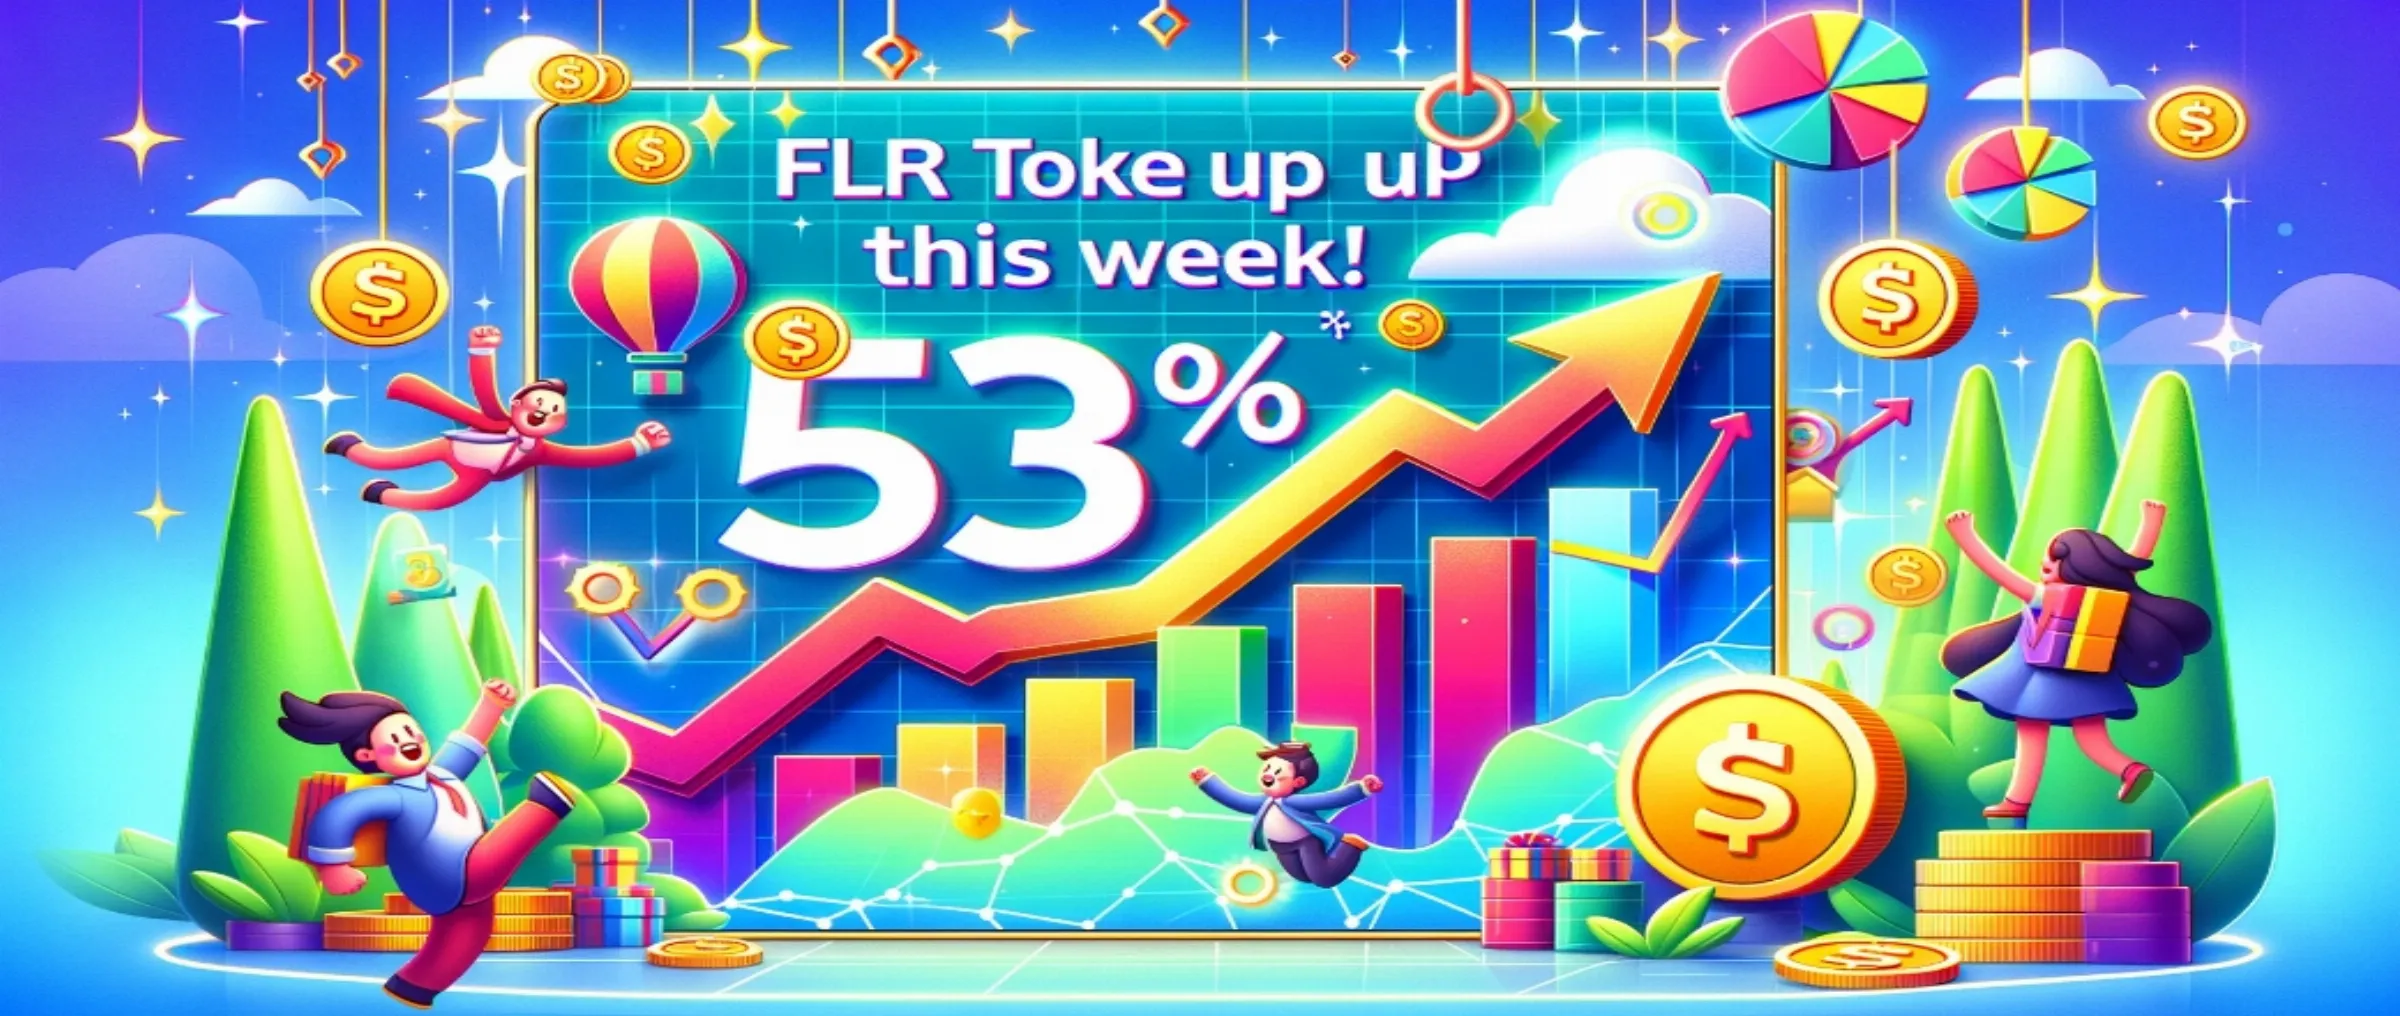 The price of the FLR token has increased by 53% in a week